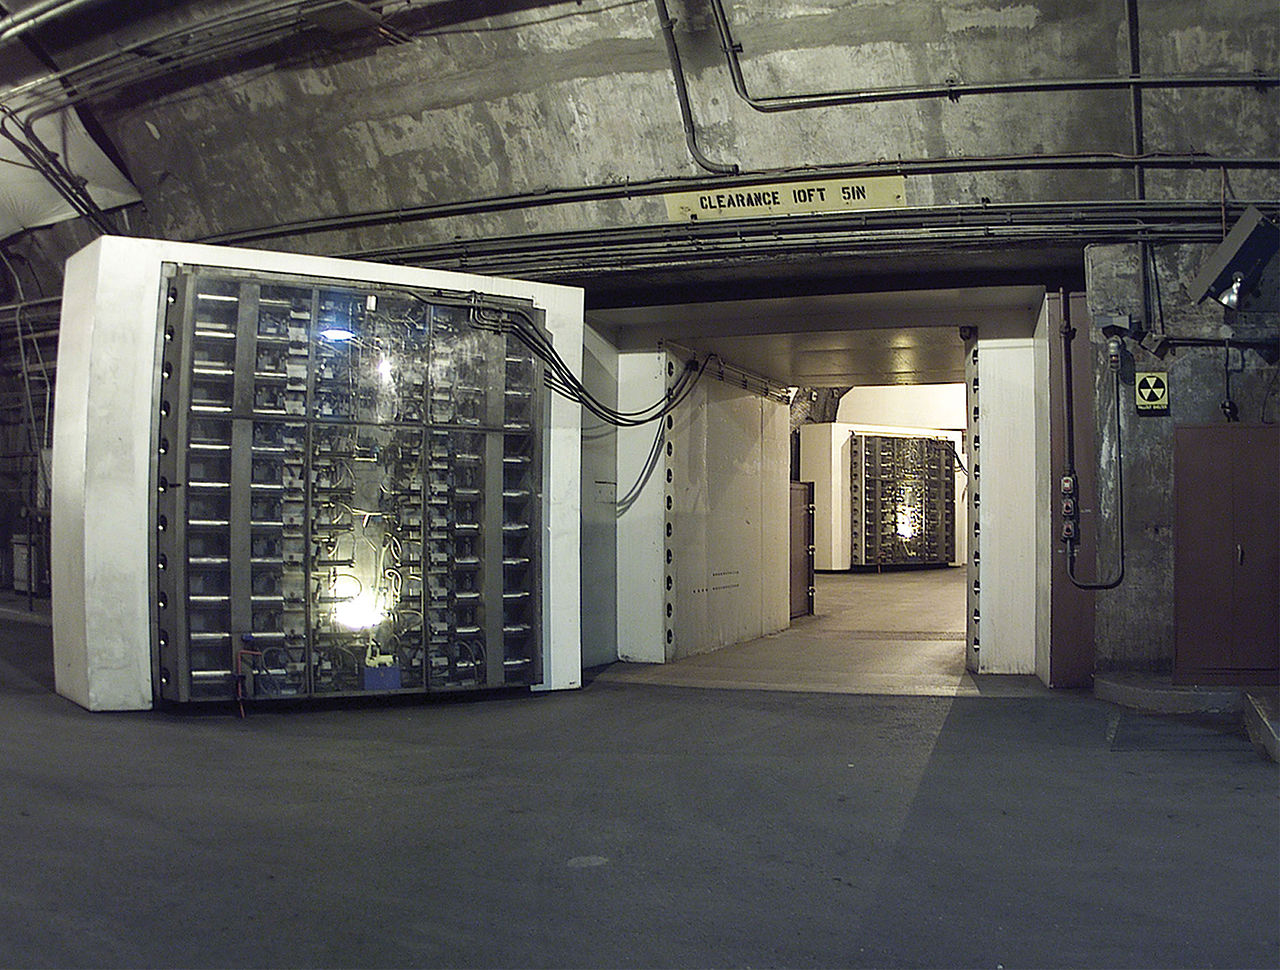 One of the blast doors at the NORAD Cheyenne Mountain complex.